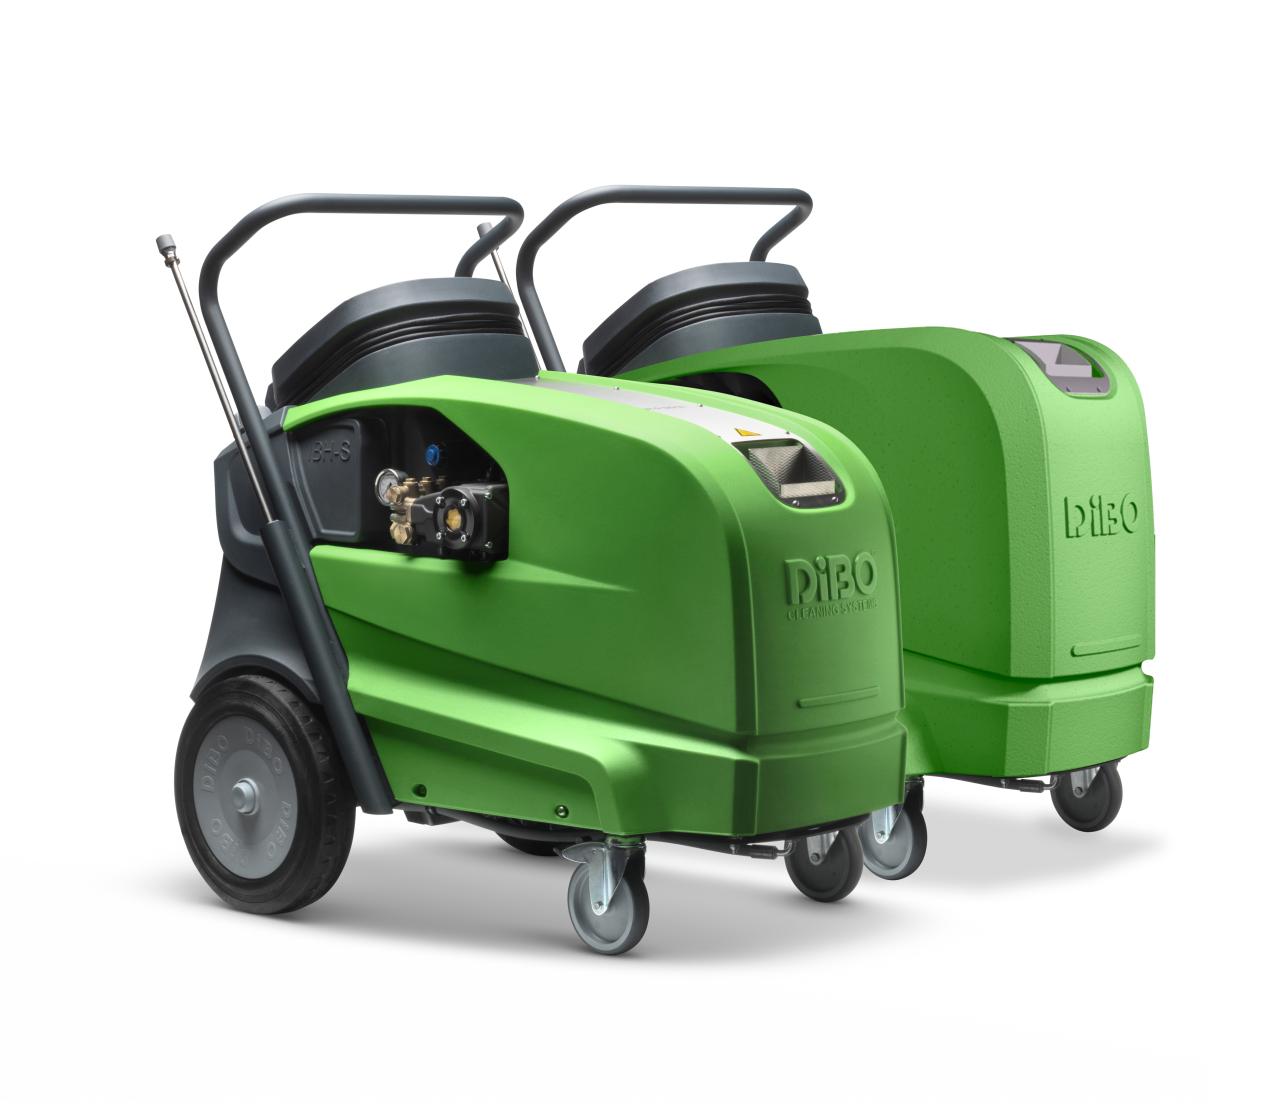 Two green hot-water high-pressure cleaners are set up diagonally next to each other. The rear one is a bit higher because it has a larger burner boiler.